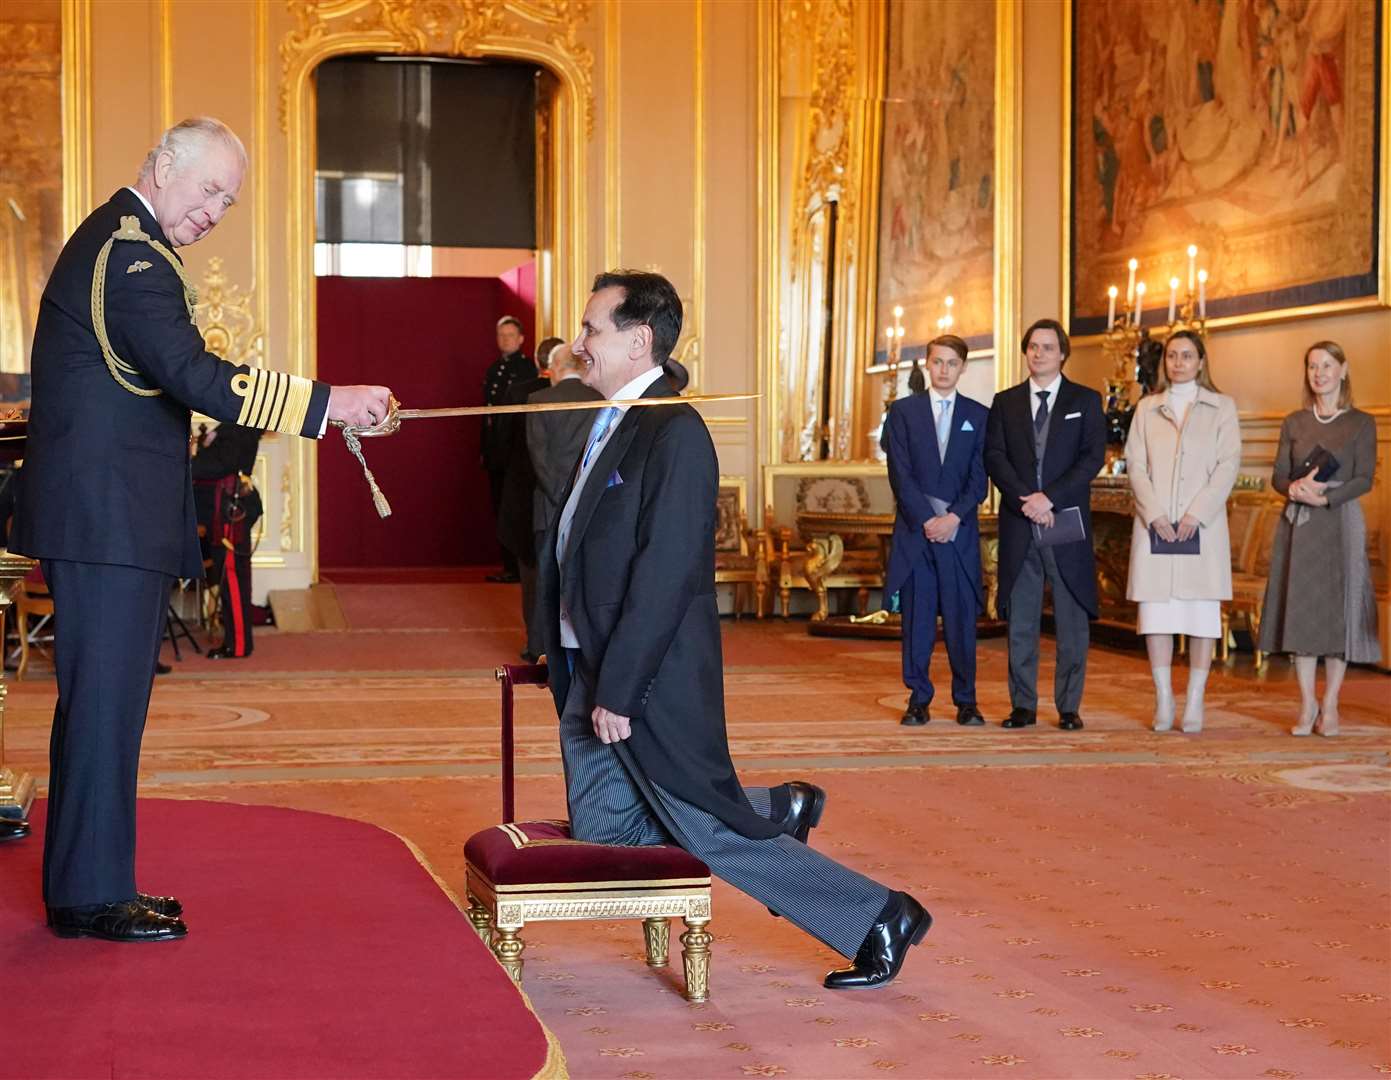 Sir Pascal Soriot was knighted by the King at Windsor Castle (Jonathan Brady/PA)